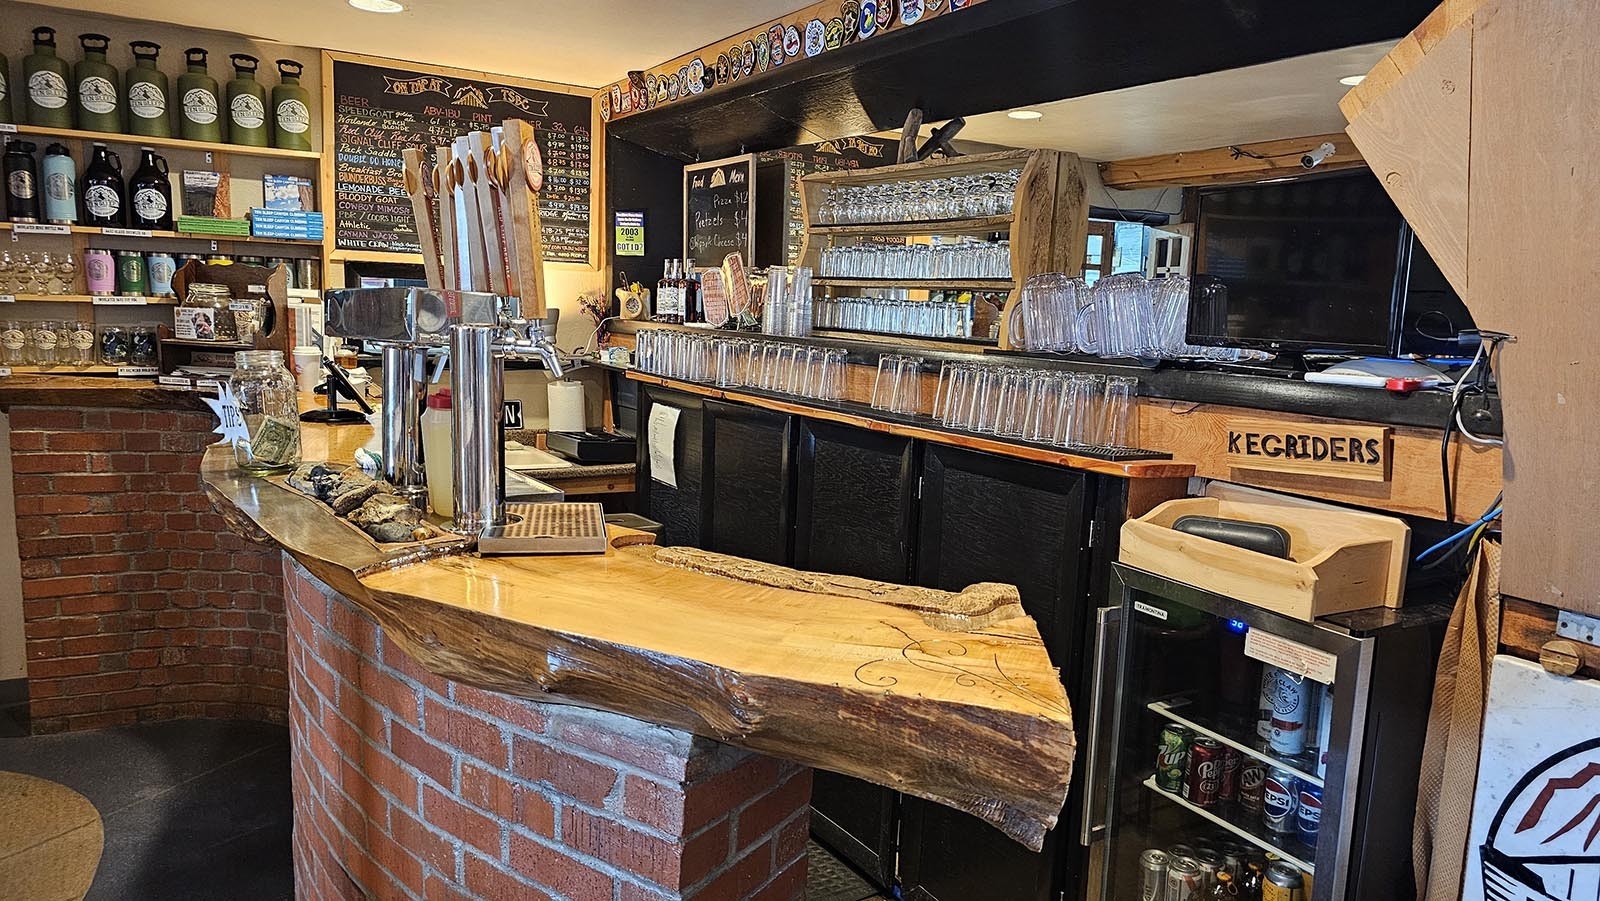 The bar is a curved piece of wood that was already that shape when it was cut down. The family had the piece of wood on their ranch, and repurposed it for a bar at Ten Sleep Brewery.